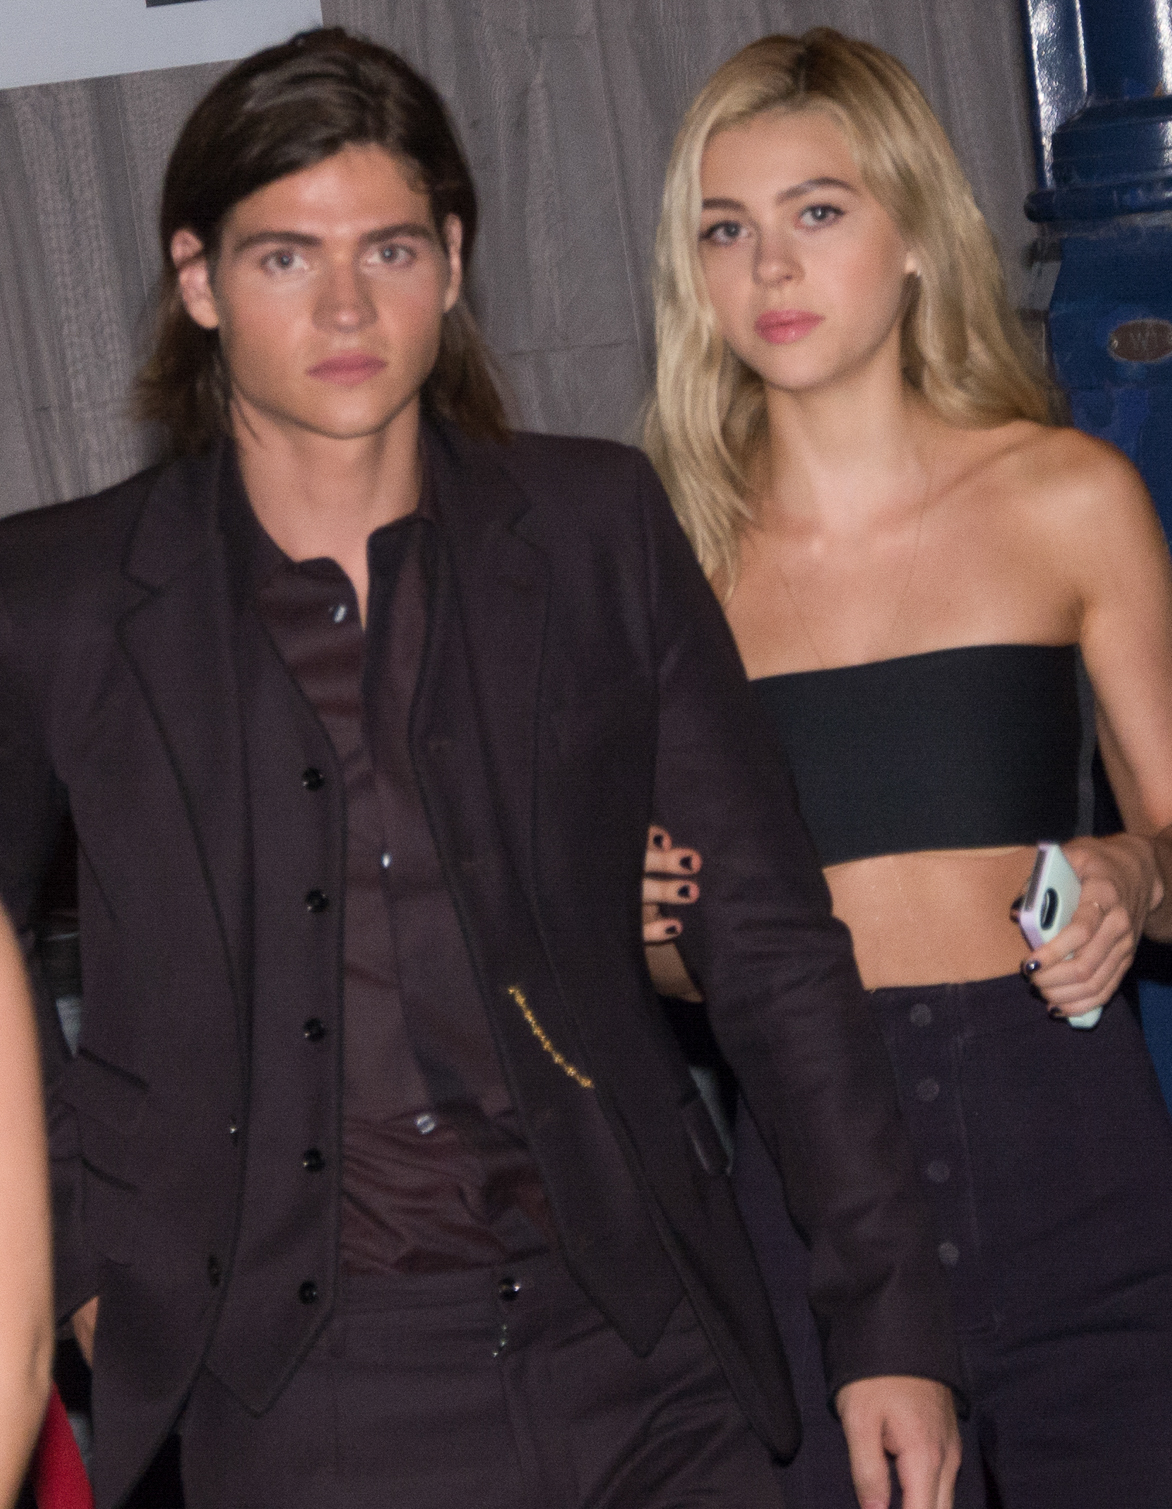 Will Peltz and Nicola Peltz at TIFF adjusted.jpg. d:Special:EntityPage/P209...